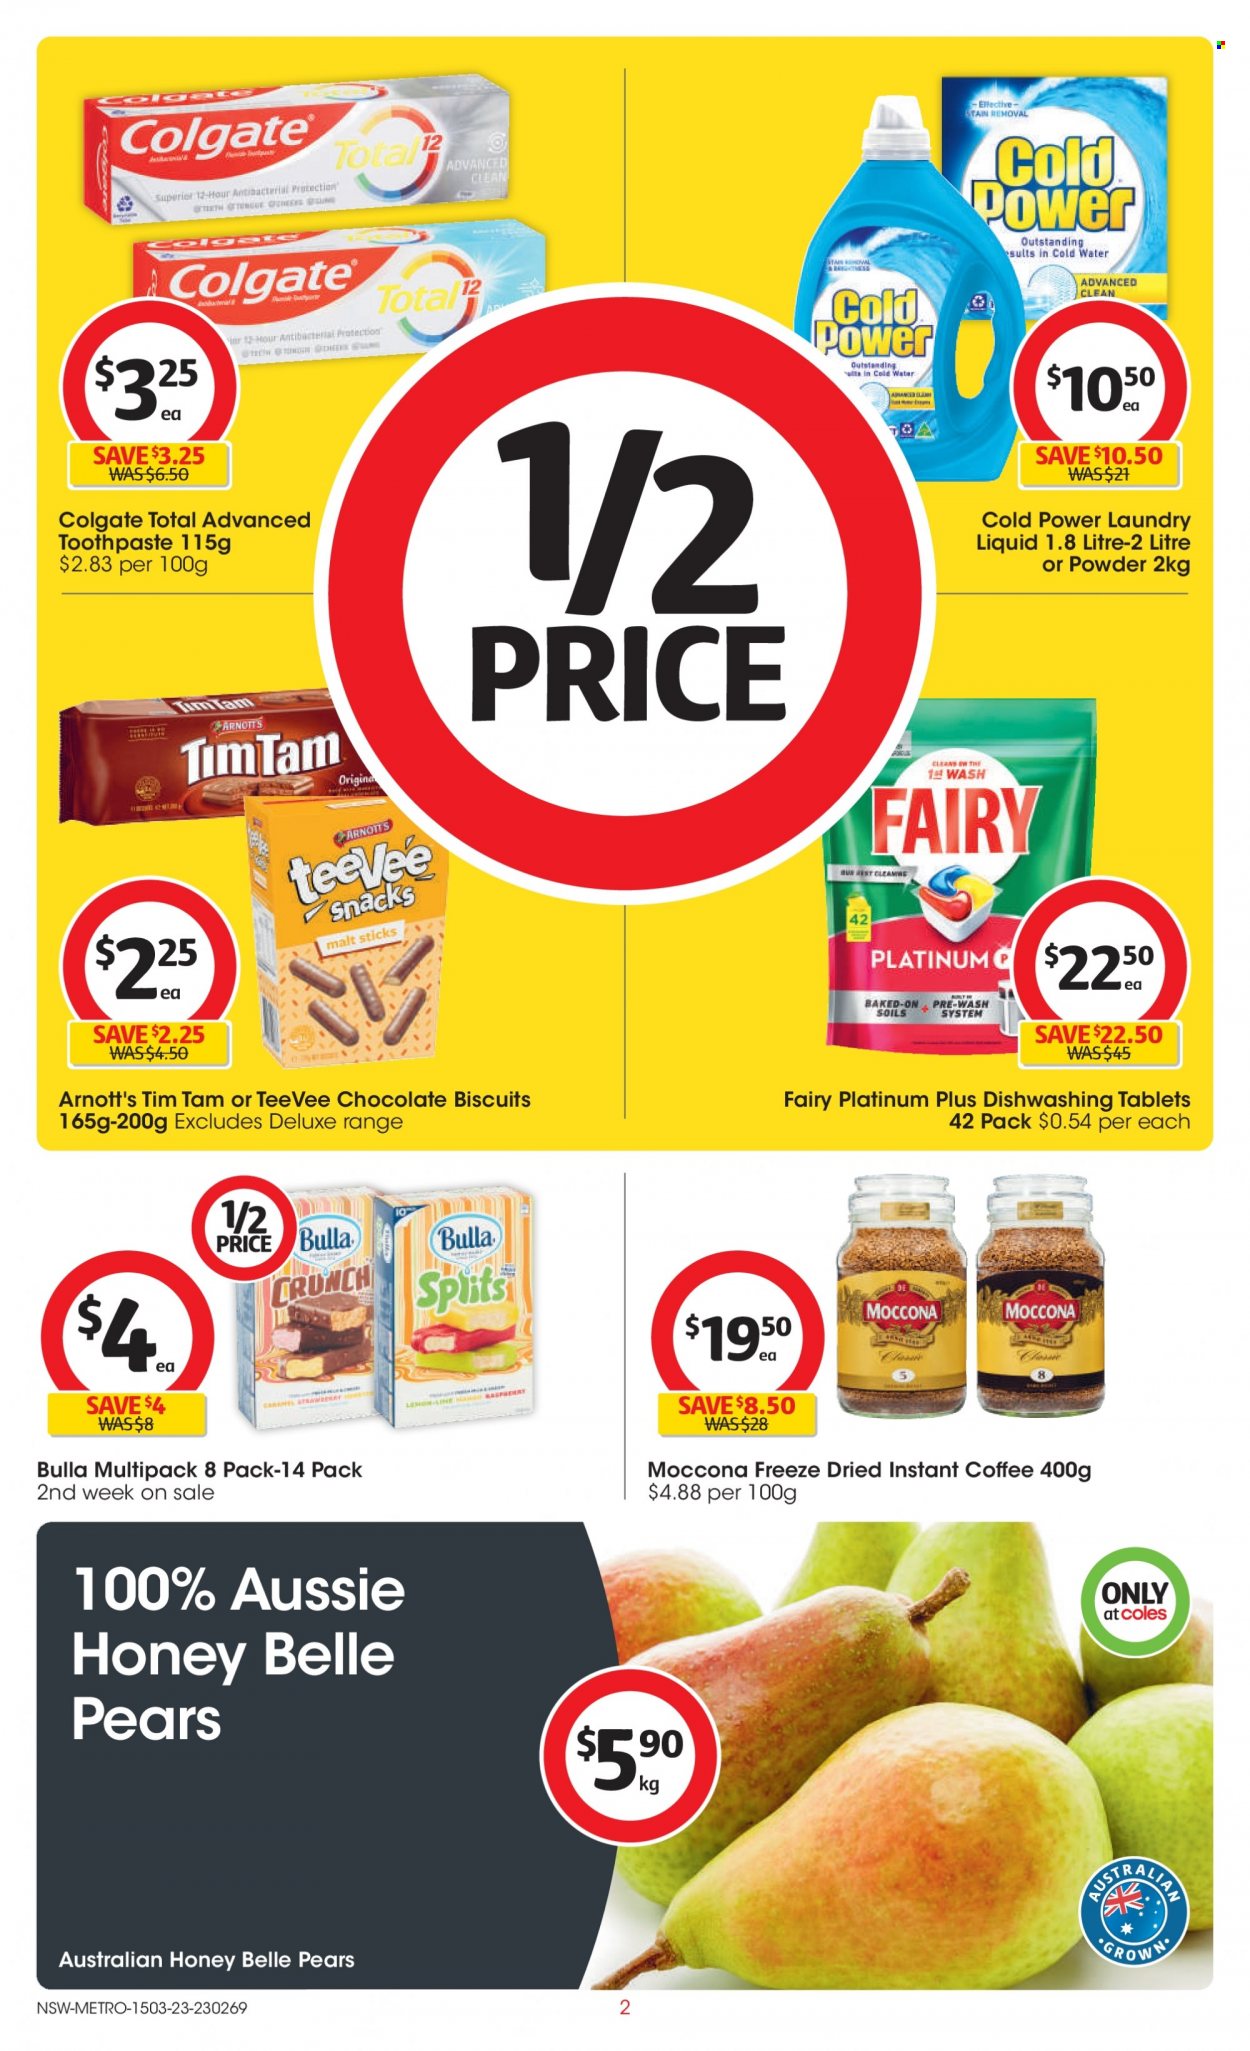 Coles Catalogue - 15 Mar 2023 - 21 Mar 2023 - Sales products - pears, chocolate, snack, Tim Tam, biscuit, malt, honey, water, coffee, instant coffee, Moccona, Fairy, laundry detergent, Colgate, toothpaste, Aussie. Page 2.